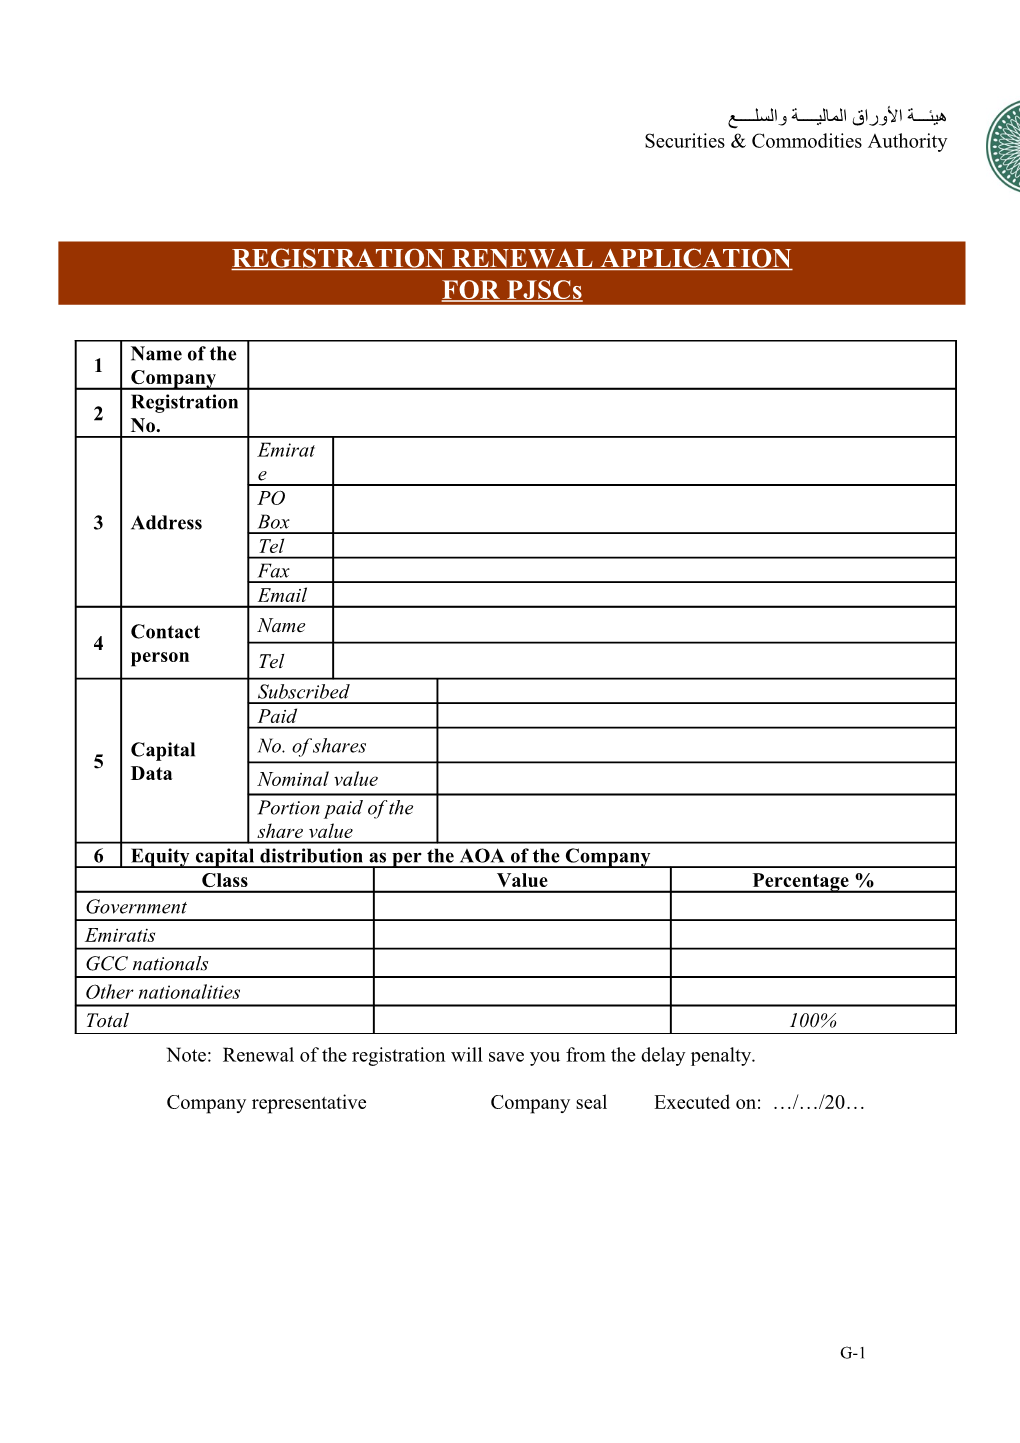 Data Form for the Board Members of Company